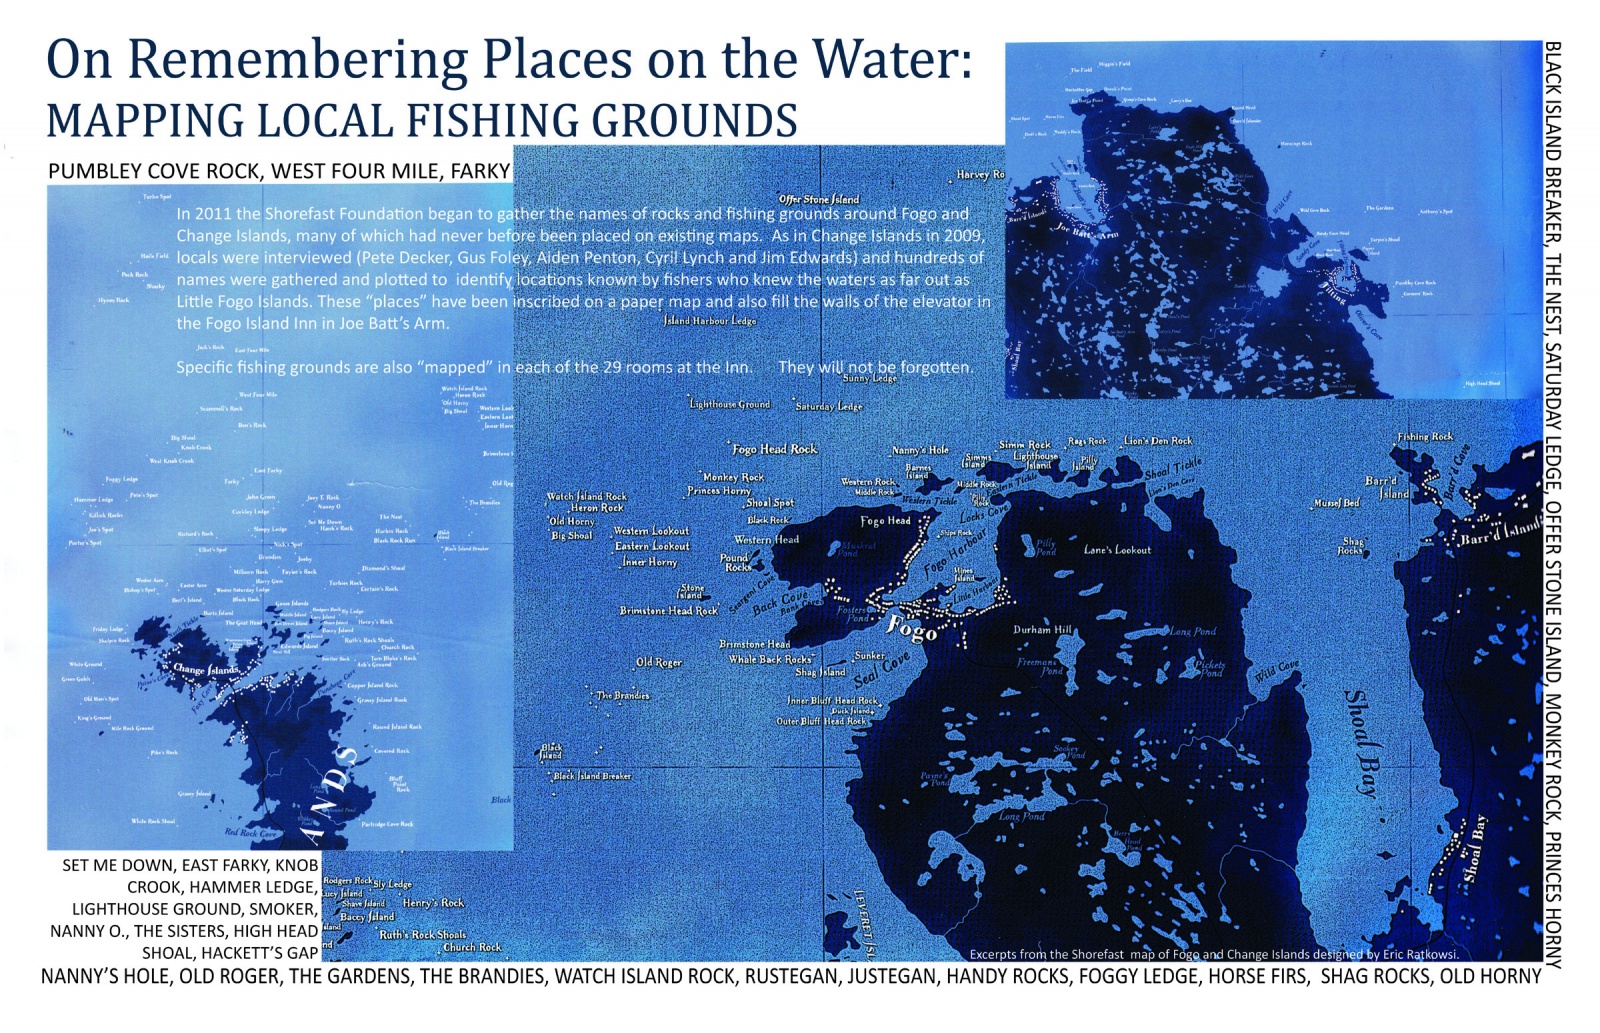 On Remembering Places on the Water: Mapping Local Fishing Grounds